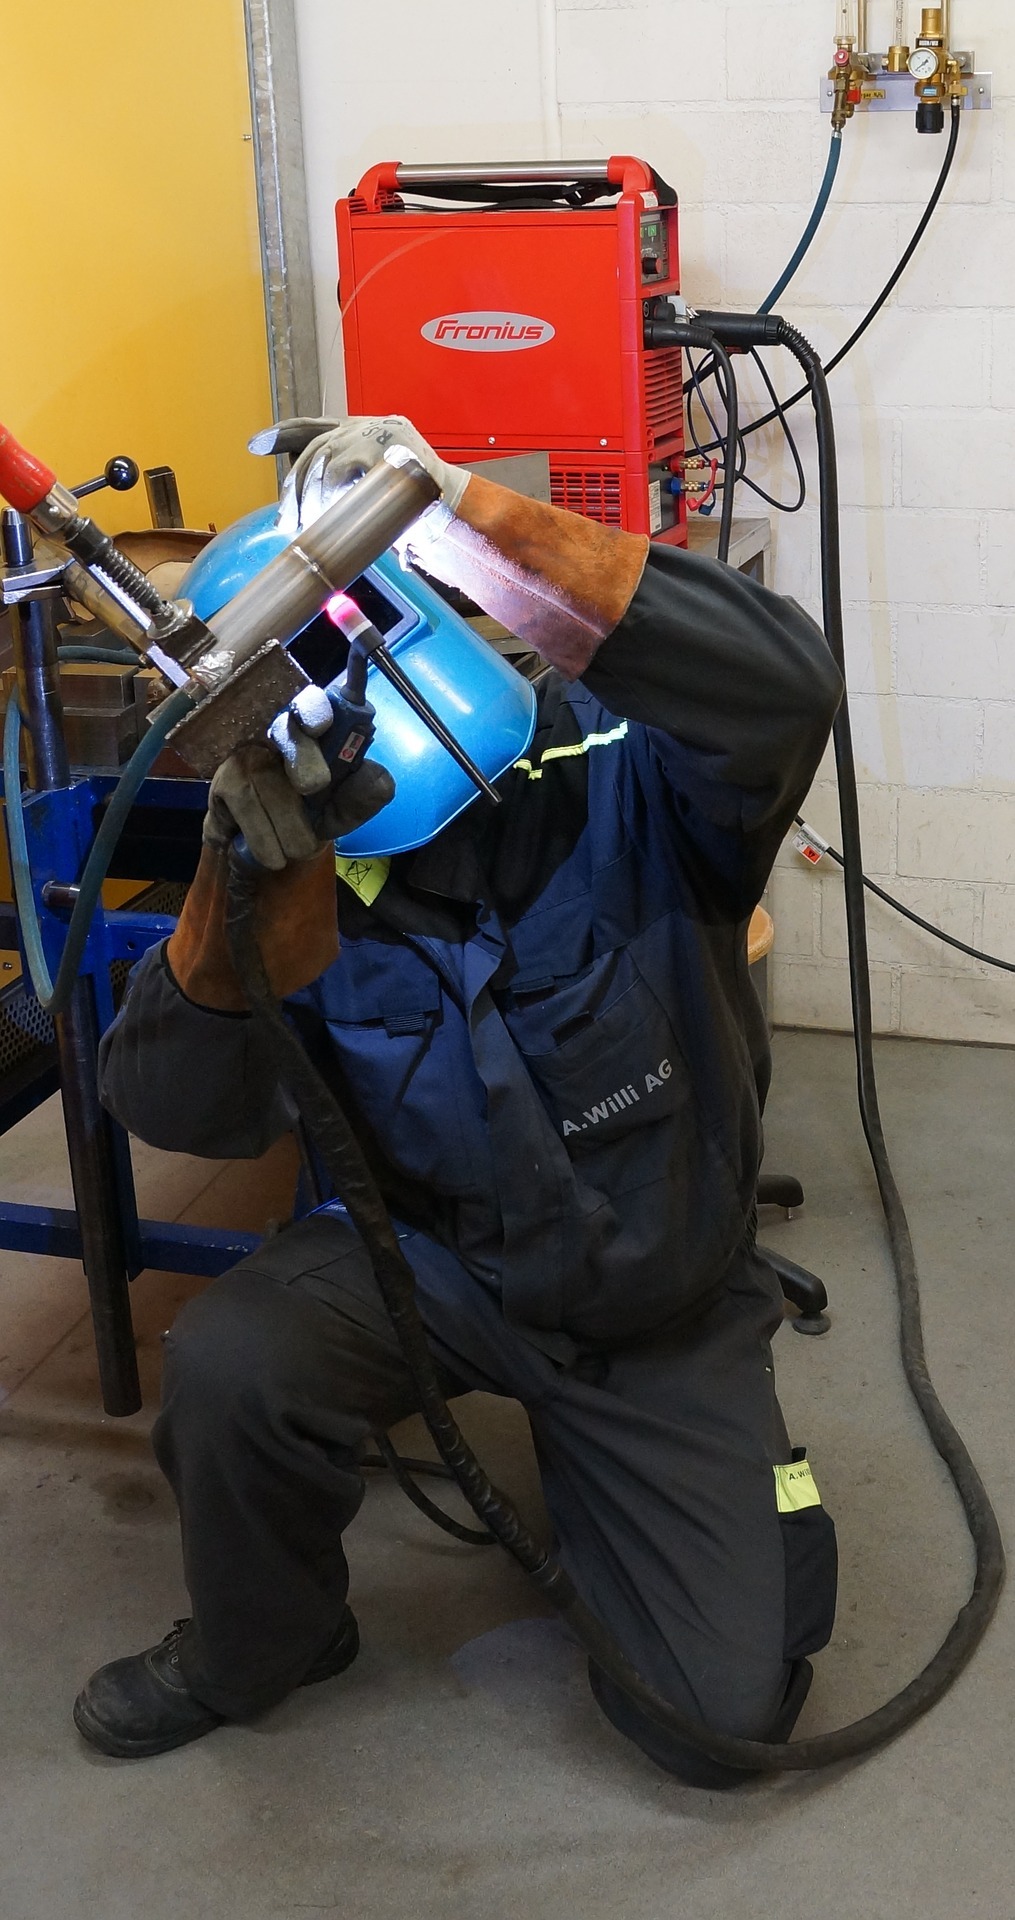 What to Look for When Buying a Welding Machine